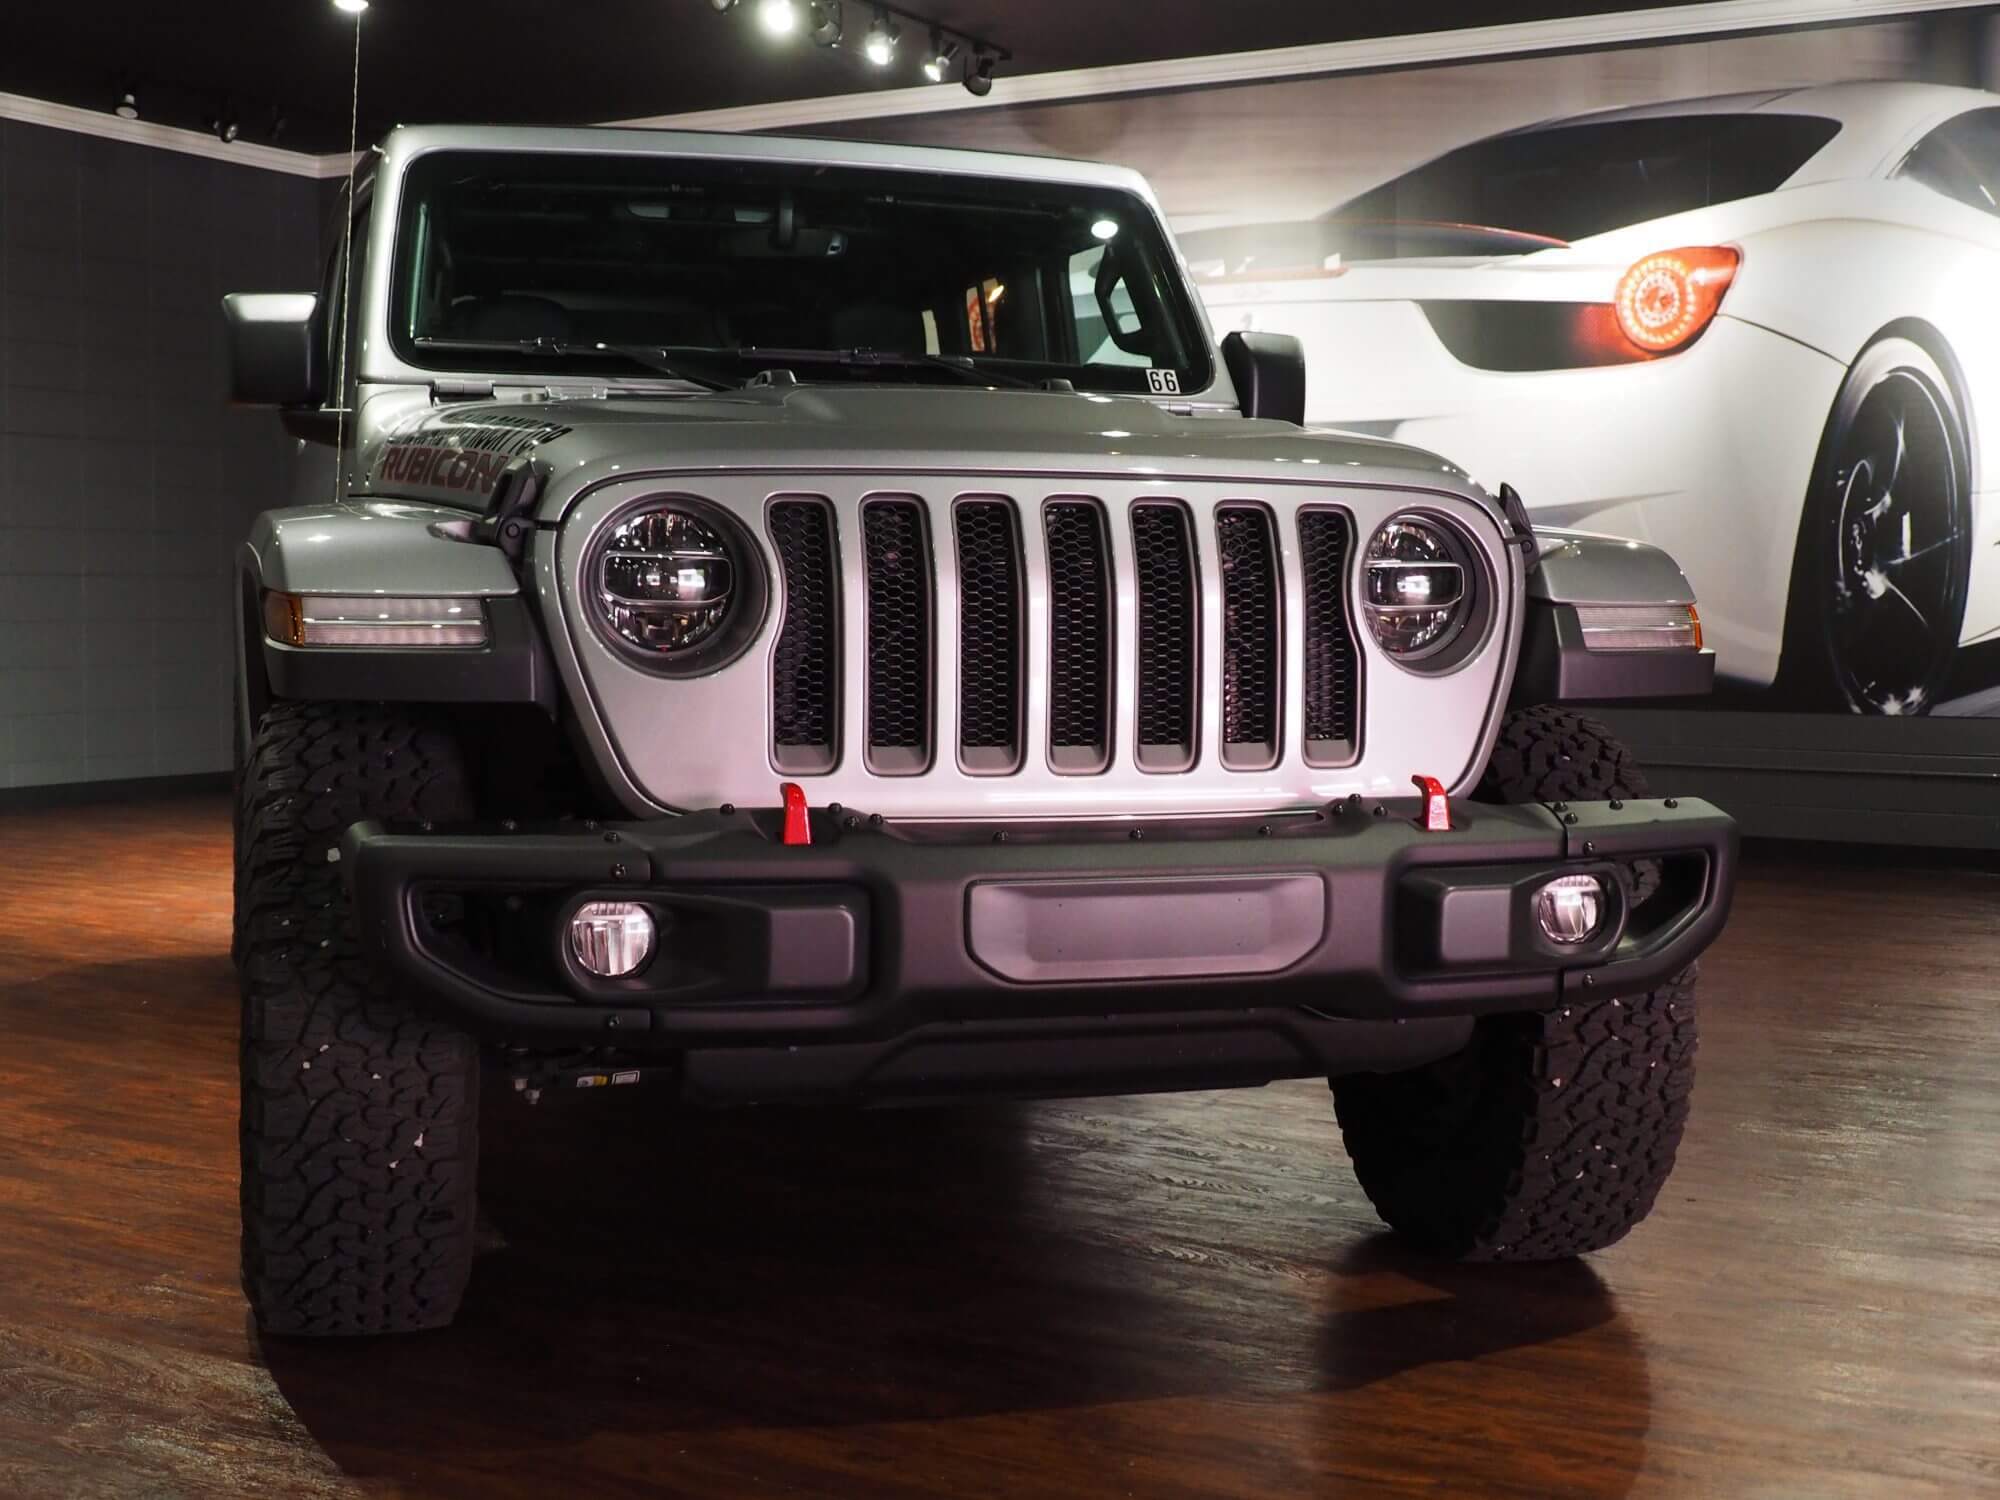 Rubicon Jeep showcased on hardwood floor with lighting and sports car backdrop